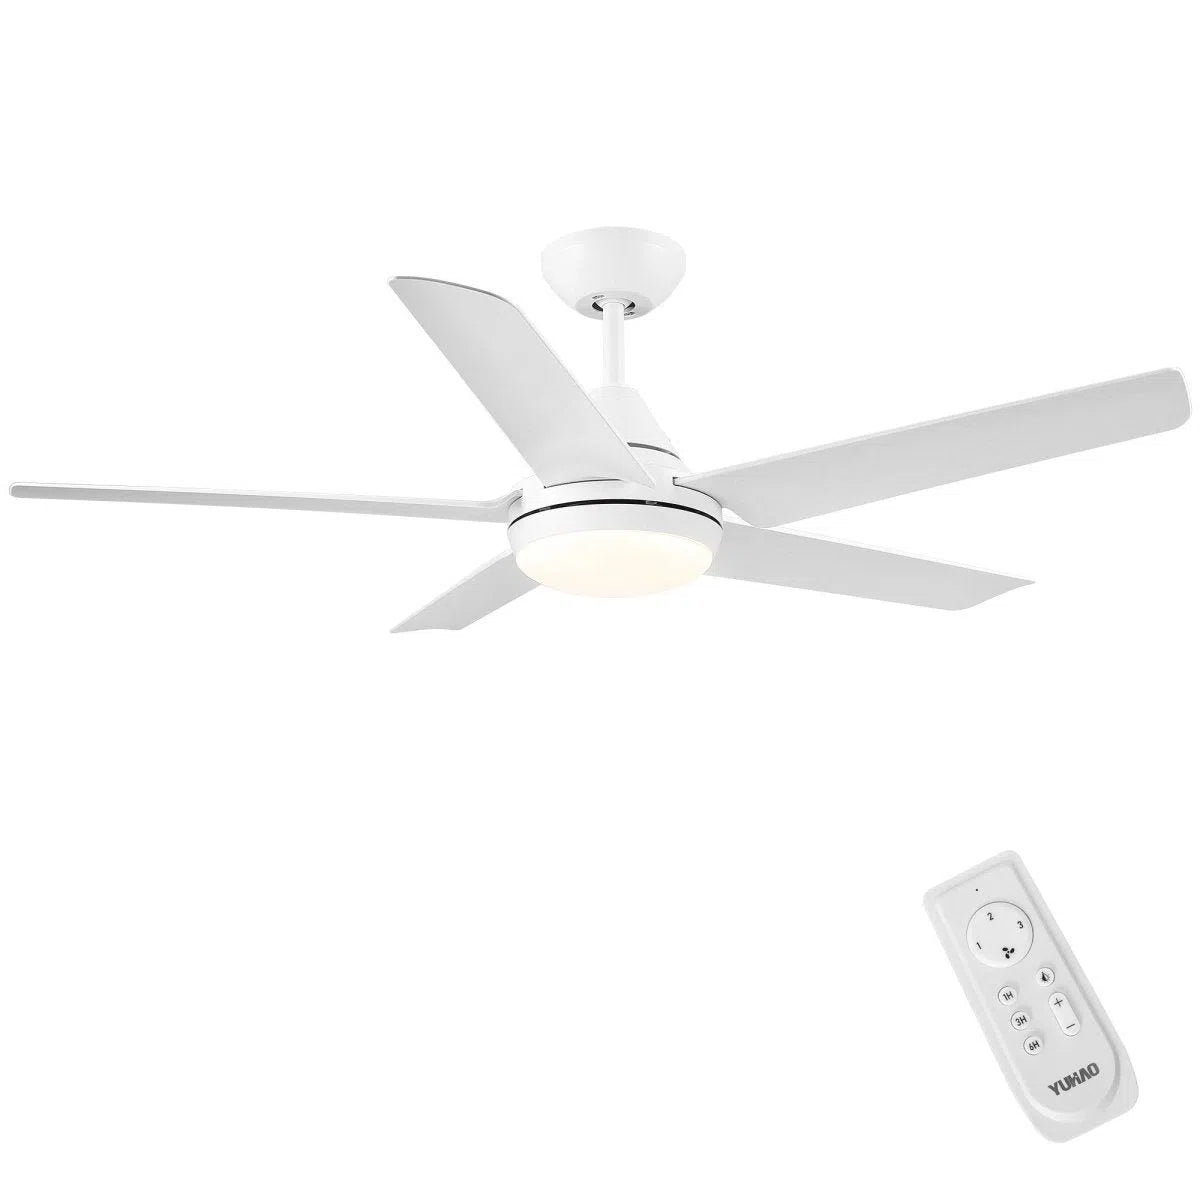 YUHAO Modern 48 in. Integrated LED Ceiling Fan Lighting with 5 White Blades Home Decor by Design